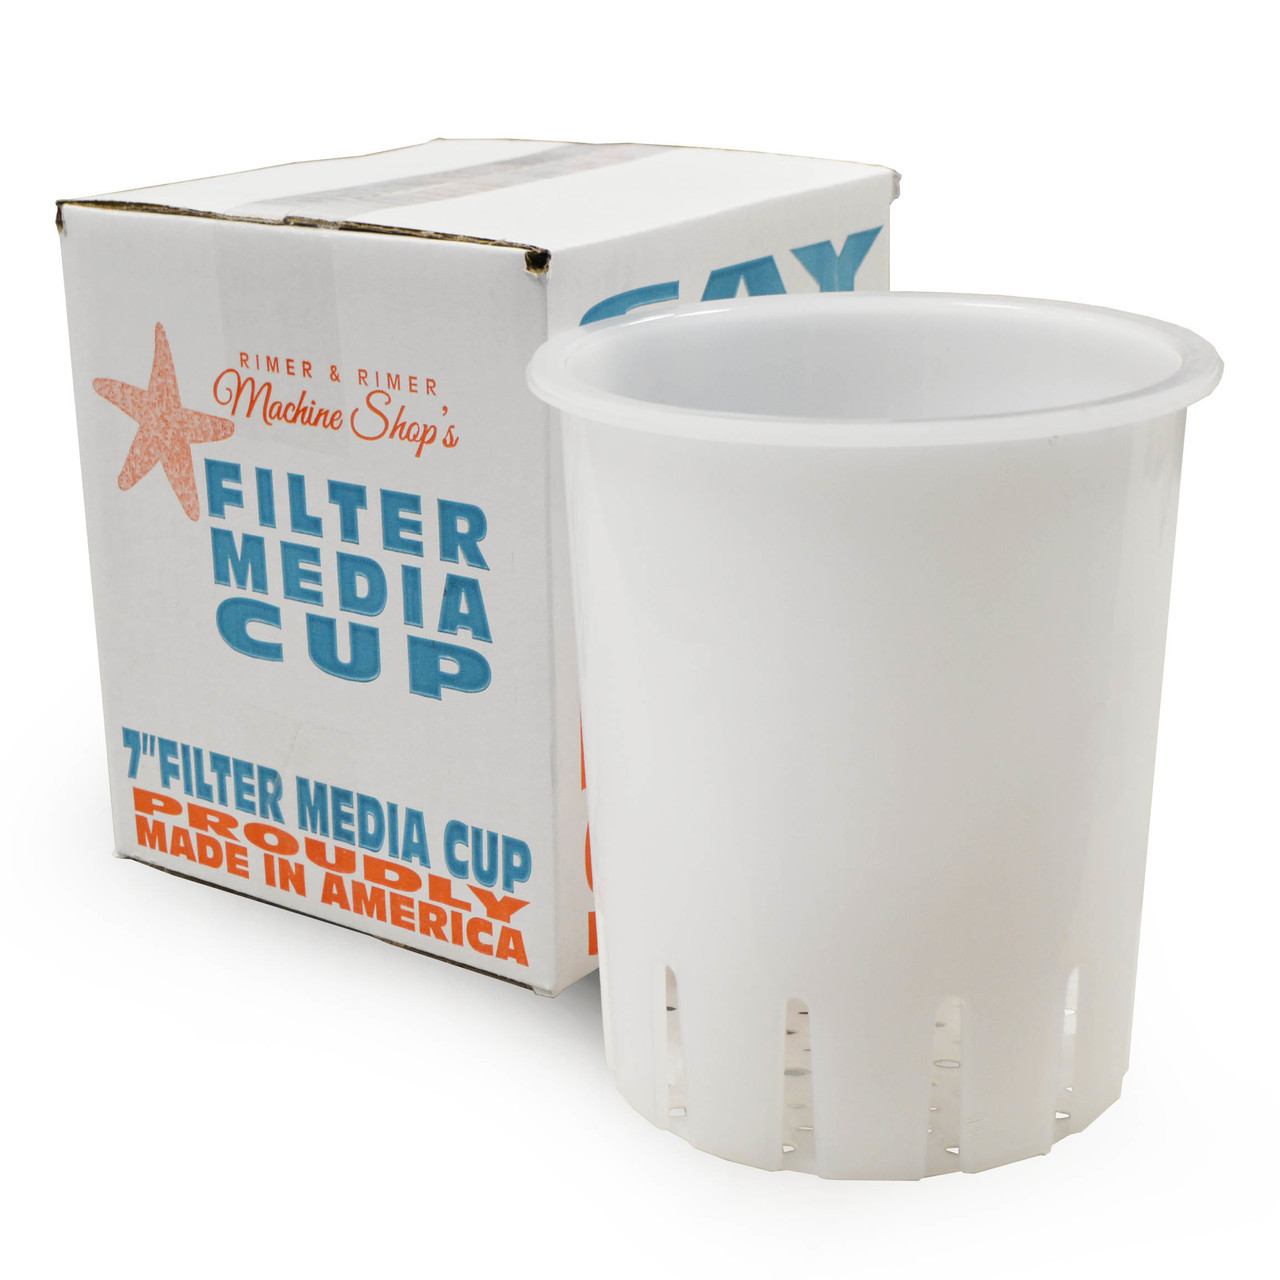 https://cdn11.bigcommerce.com/s-fh5tkm/images/stencil/1280x1280/products/3605/10721/7in-FILTER-CUP-CLEAR-AND-BOX-1000x1000__38340.1530640496.jpg?c=2?imbypass=on